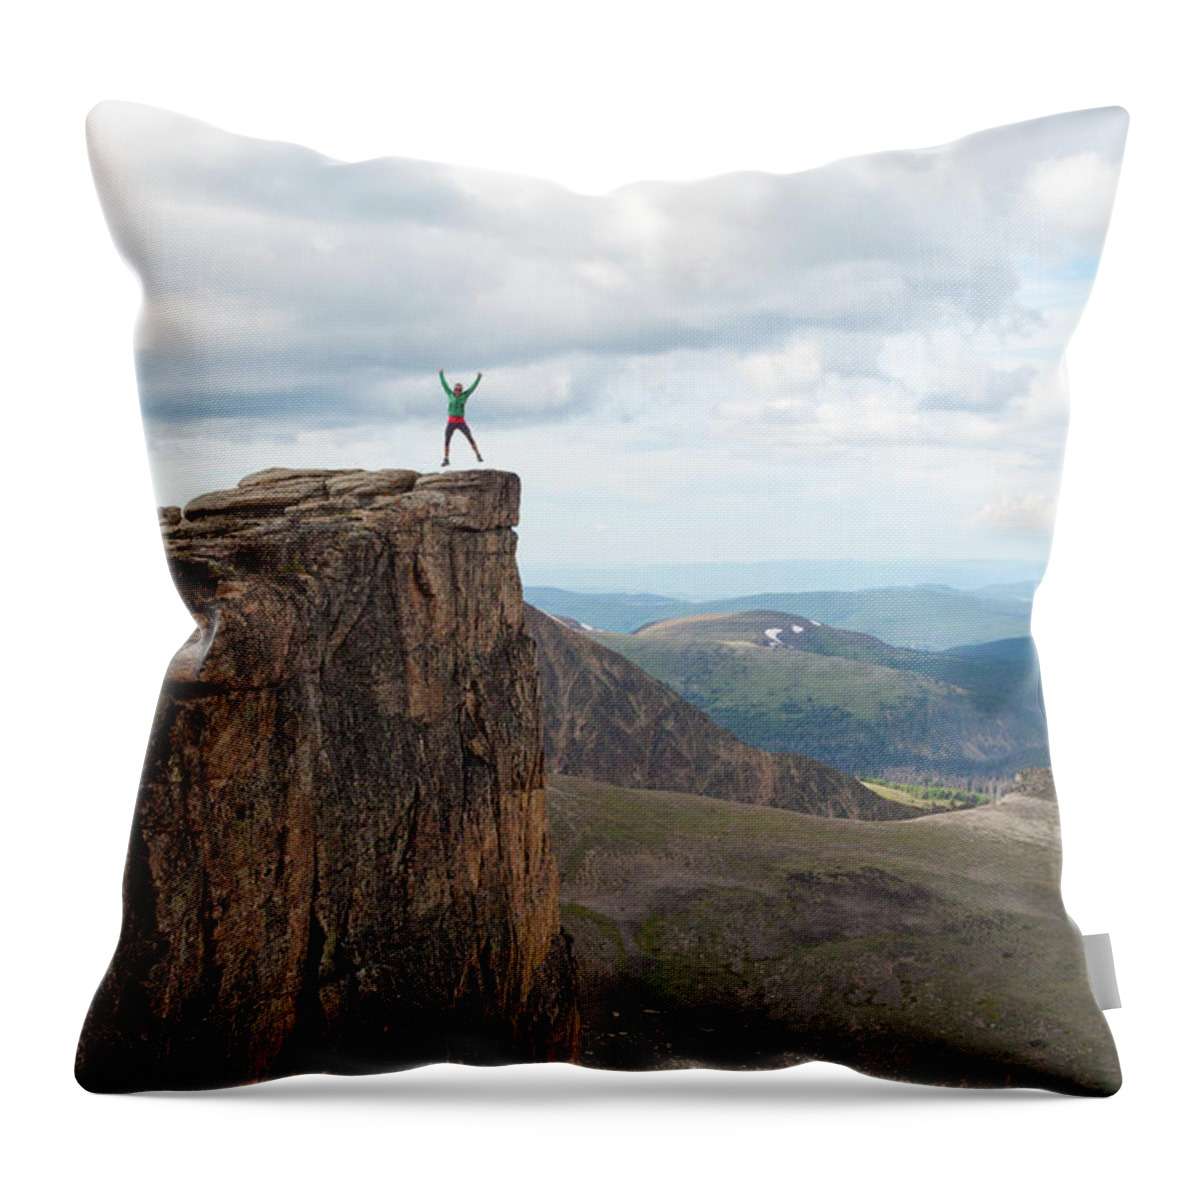 Young Women Throw Pillow featuring the photograph A Backpacker Jumps Into The Air Next by Christopher Kimmel